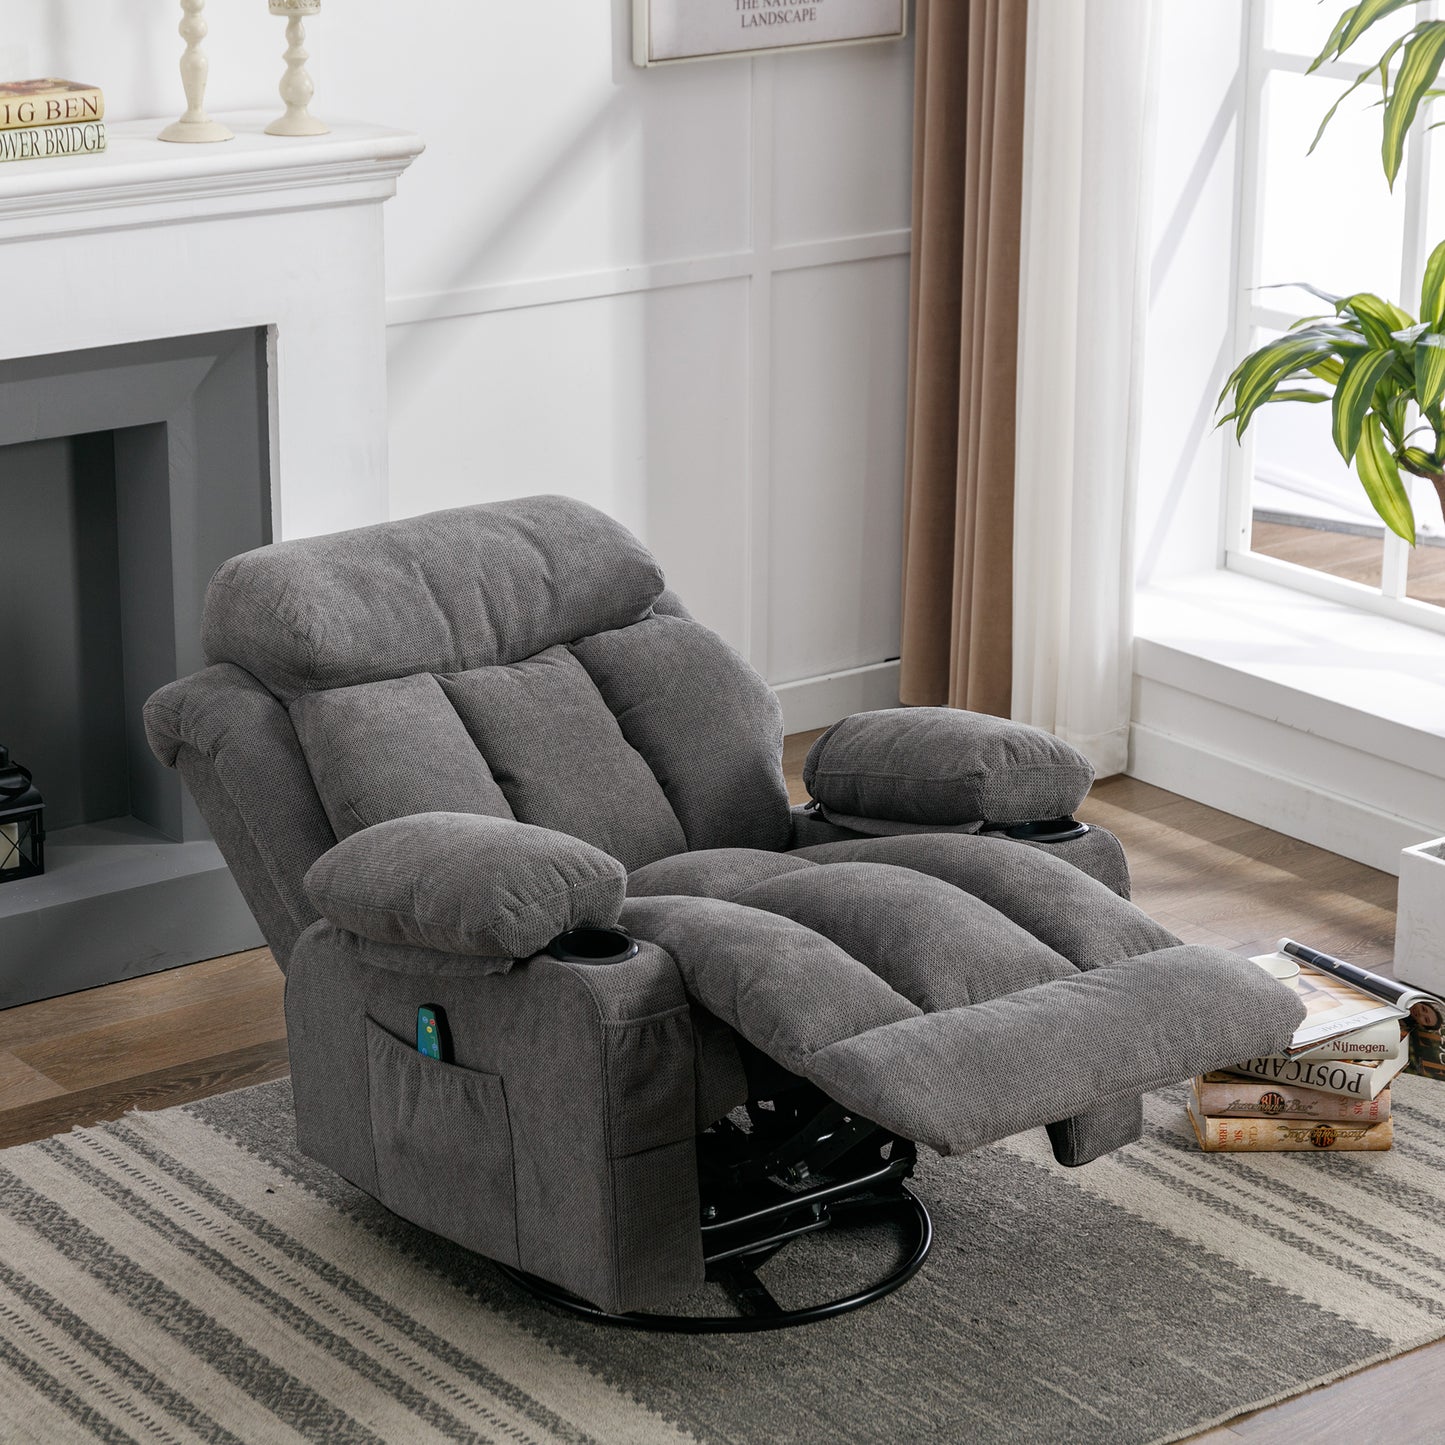 SYNGAR Recliner Sofa Chair with Heat and Massage Function, Manual Recliner Chair with USB and 2 Cup Holders, Velvet Rocker Single Sofa, Swivel Glider Chair for Nursery Bedroom Home Theater, Gray